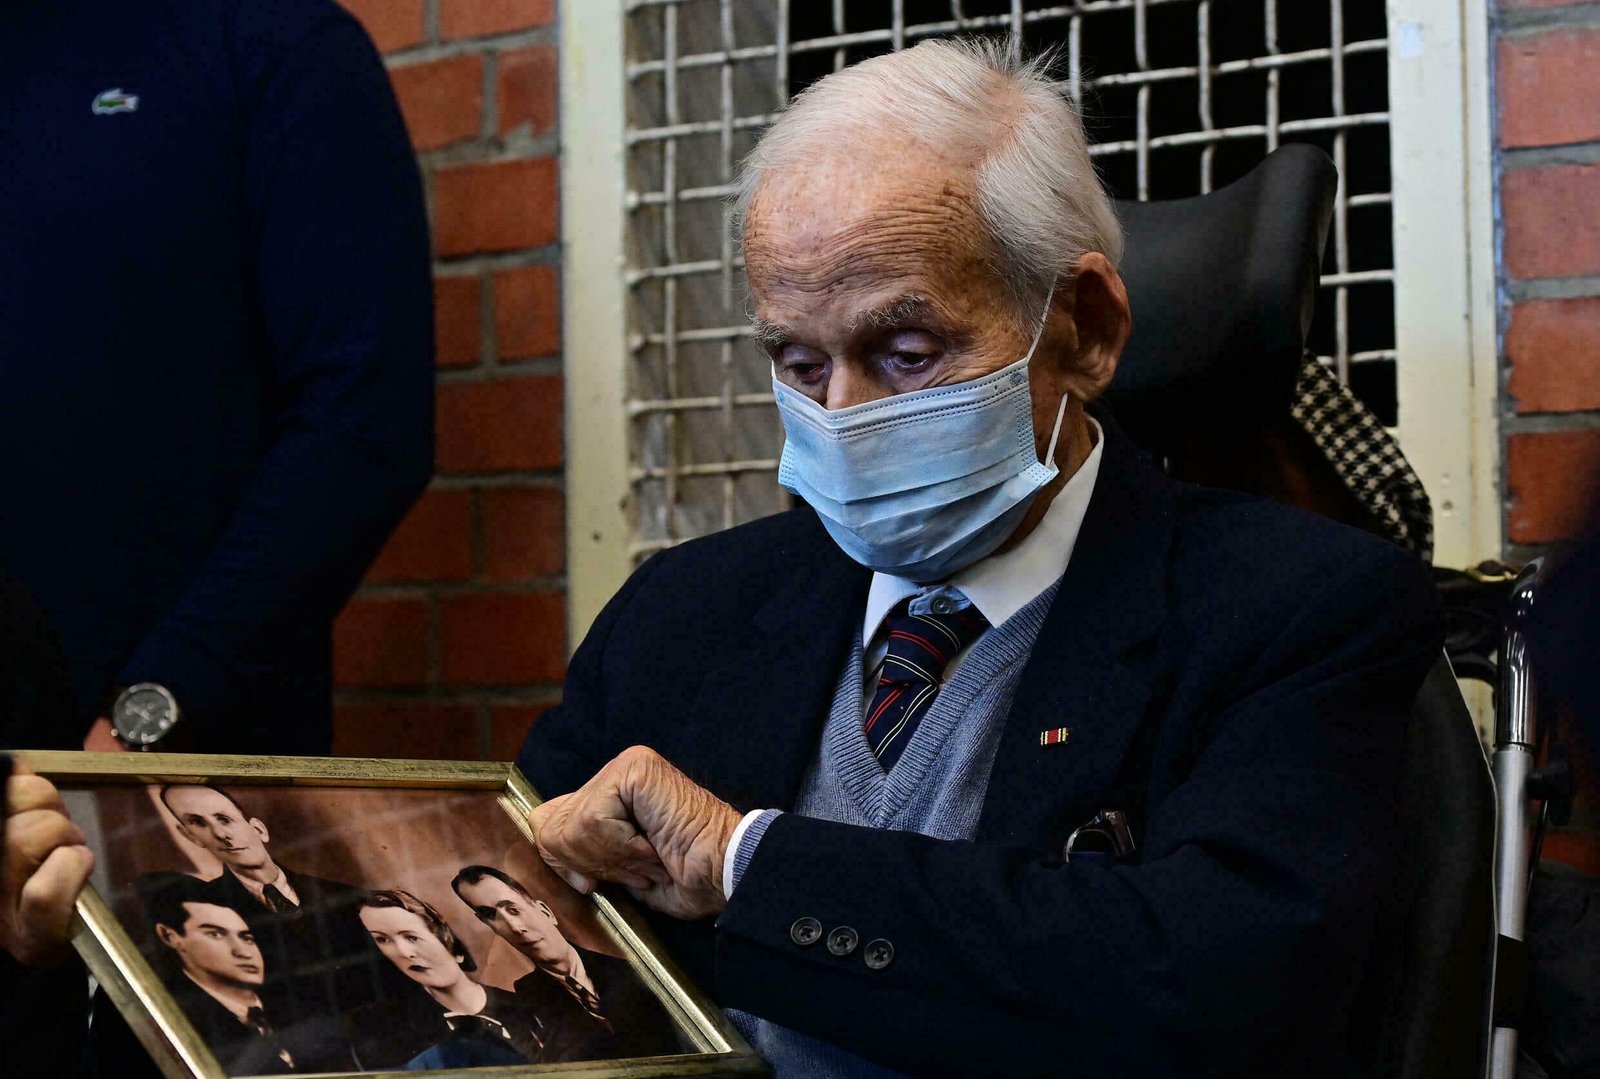 Germany puts 100-year-old on trial for Nazi crimes